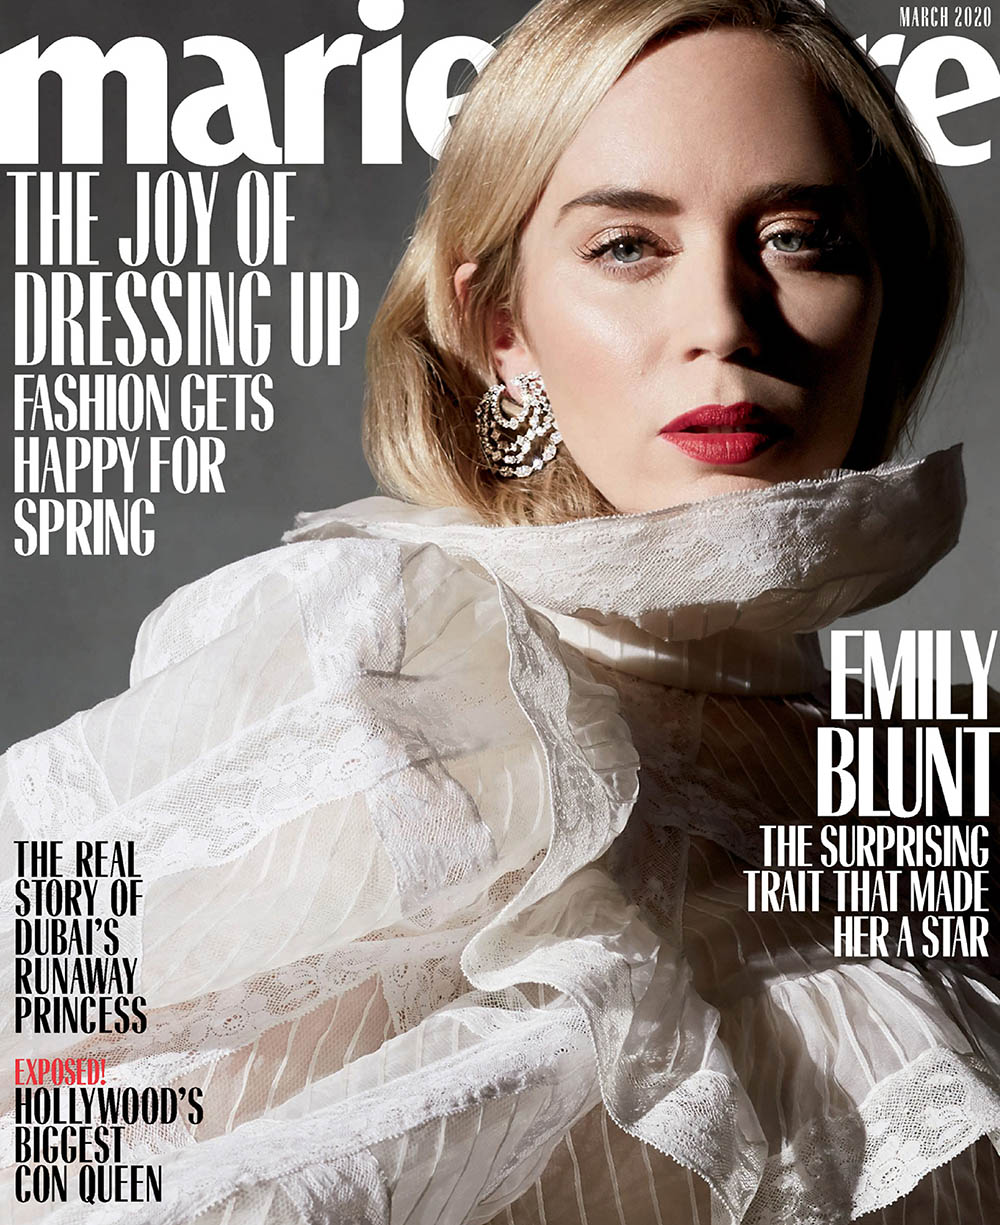 Emily Blunt Covers Marie Claire Us March 2020 By Denise Hewitt Lucci